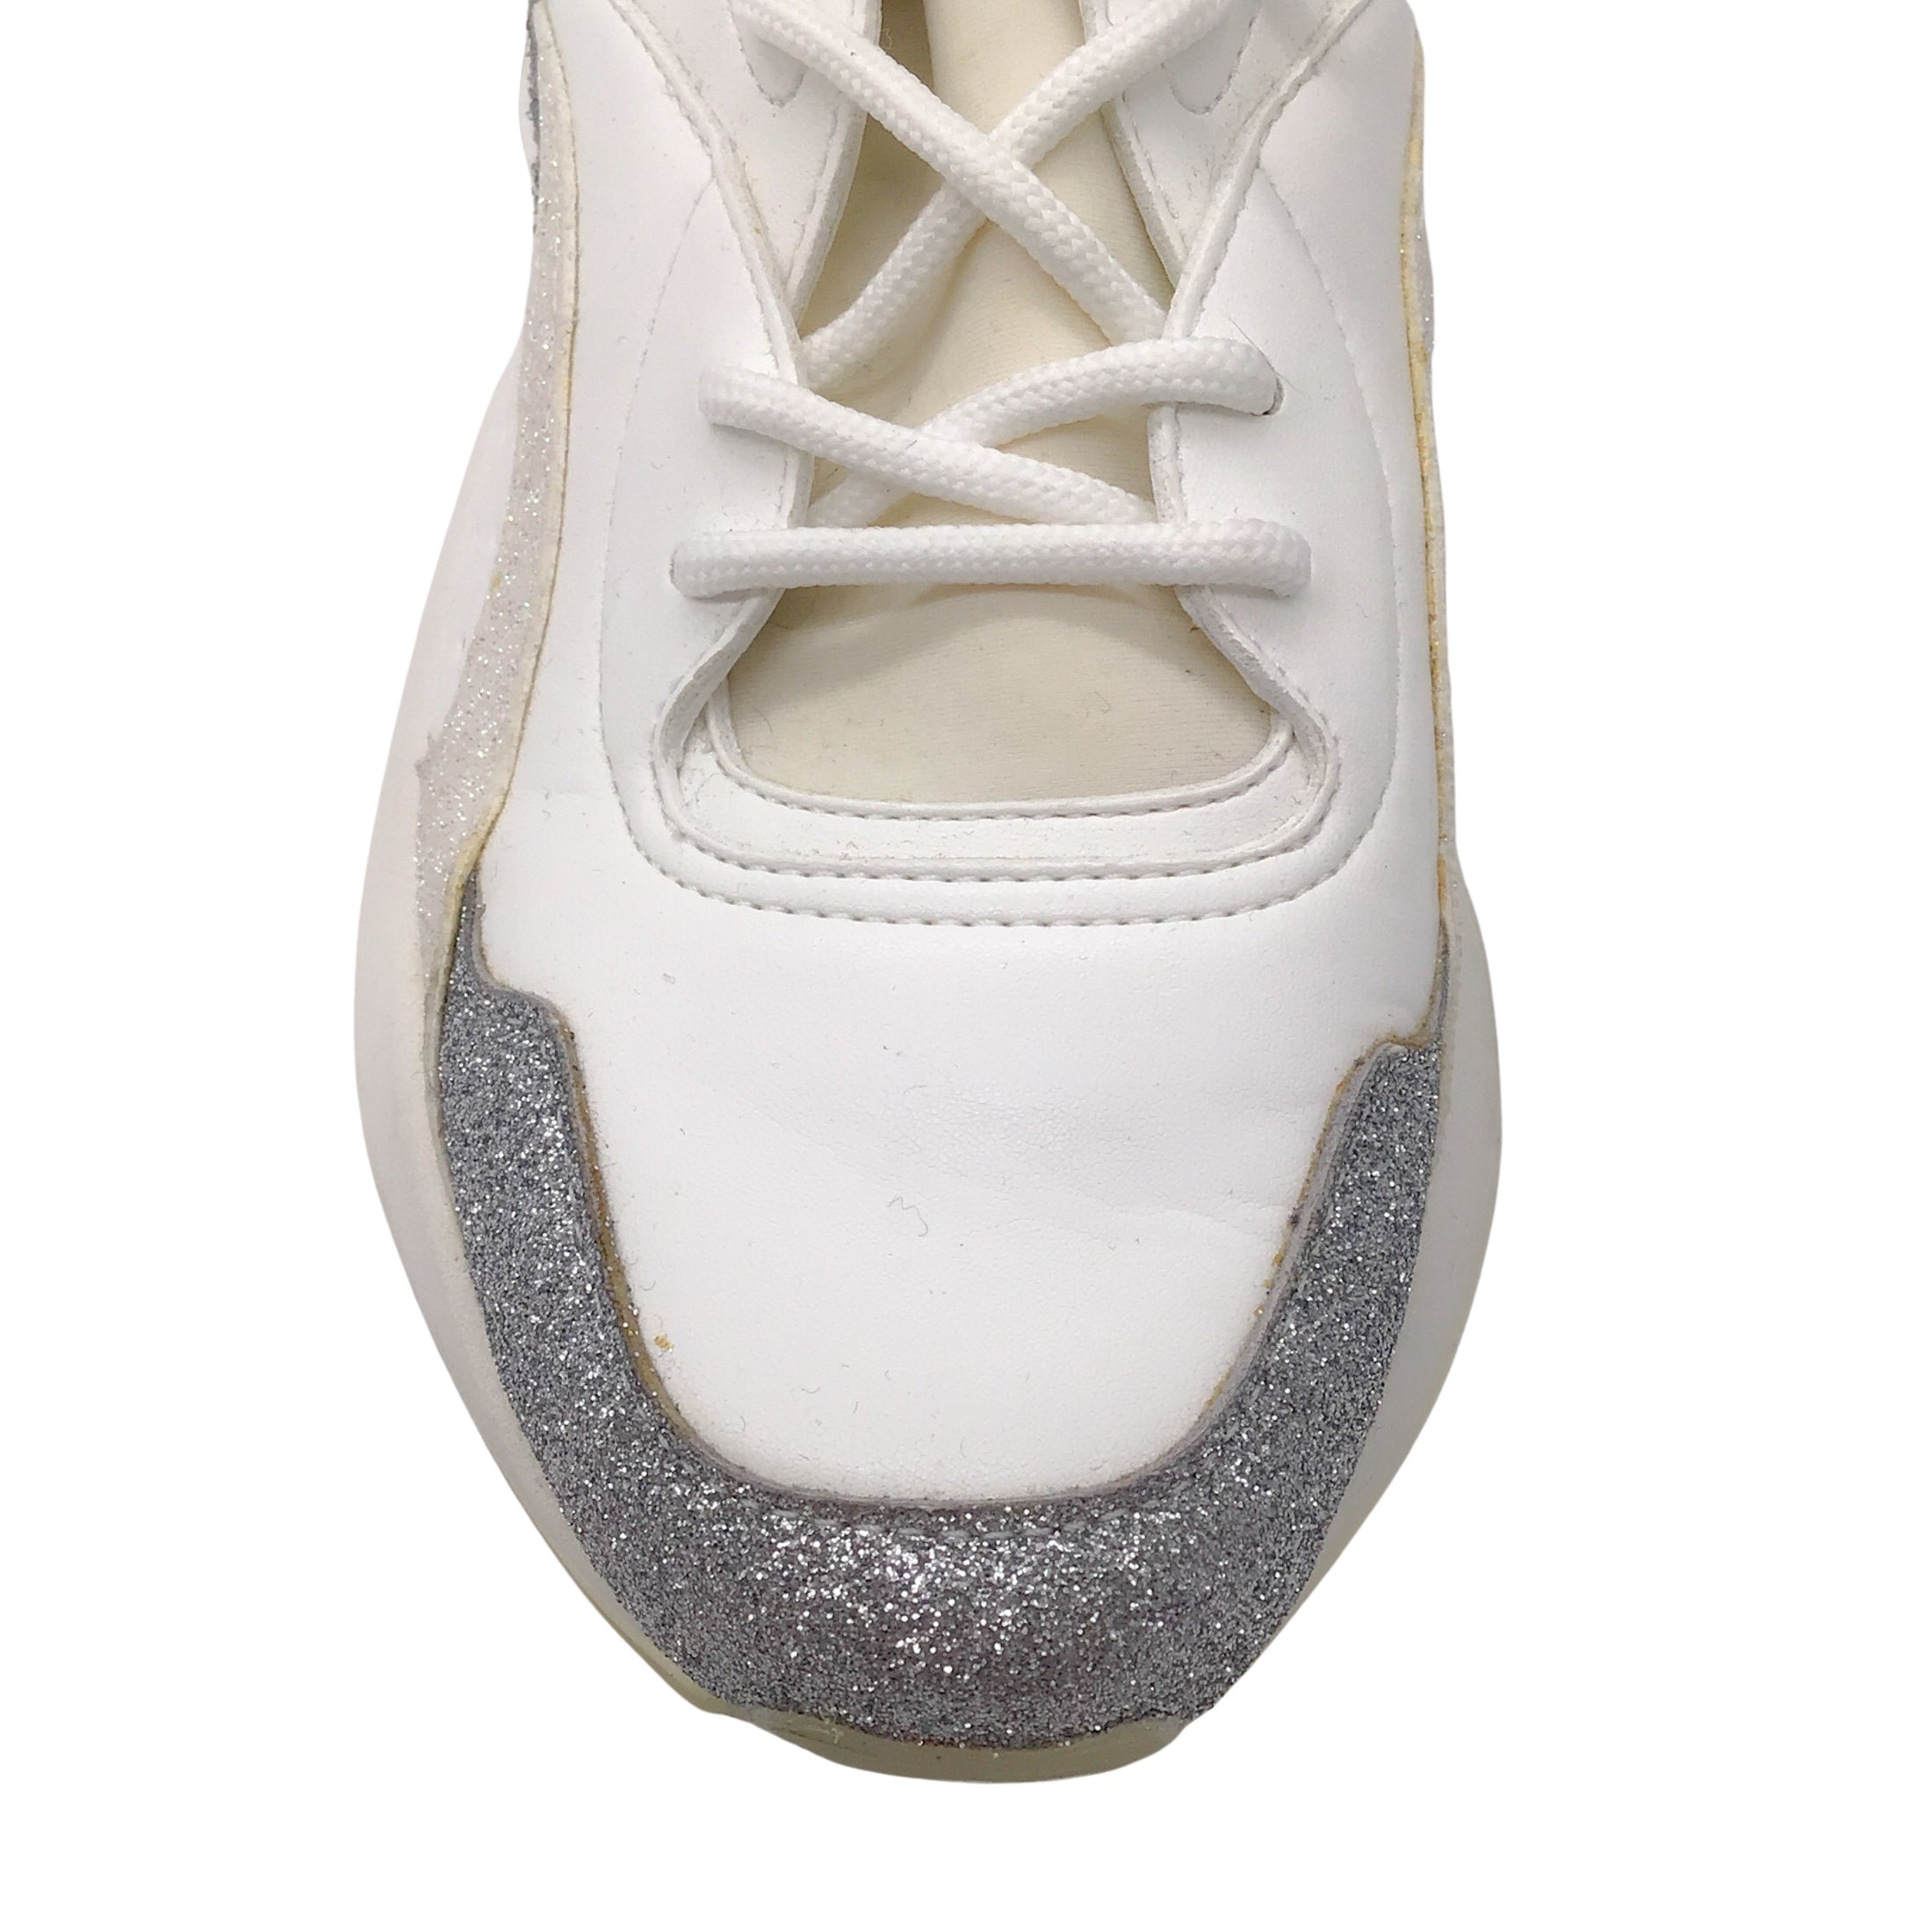 Stella McCartney Eclypse White / Silver Metallic Glitter Detail Chunky Sole Lace-up Leather Sneakers